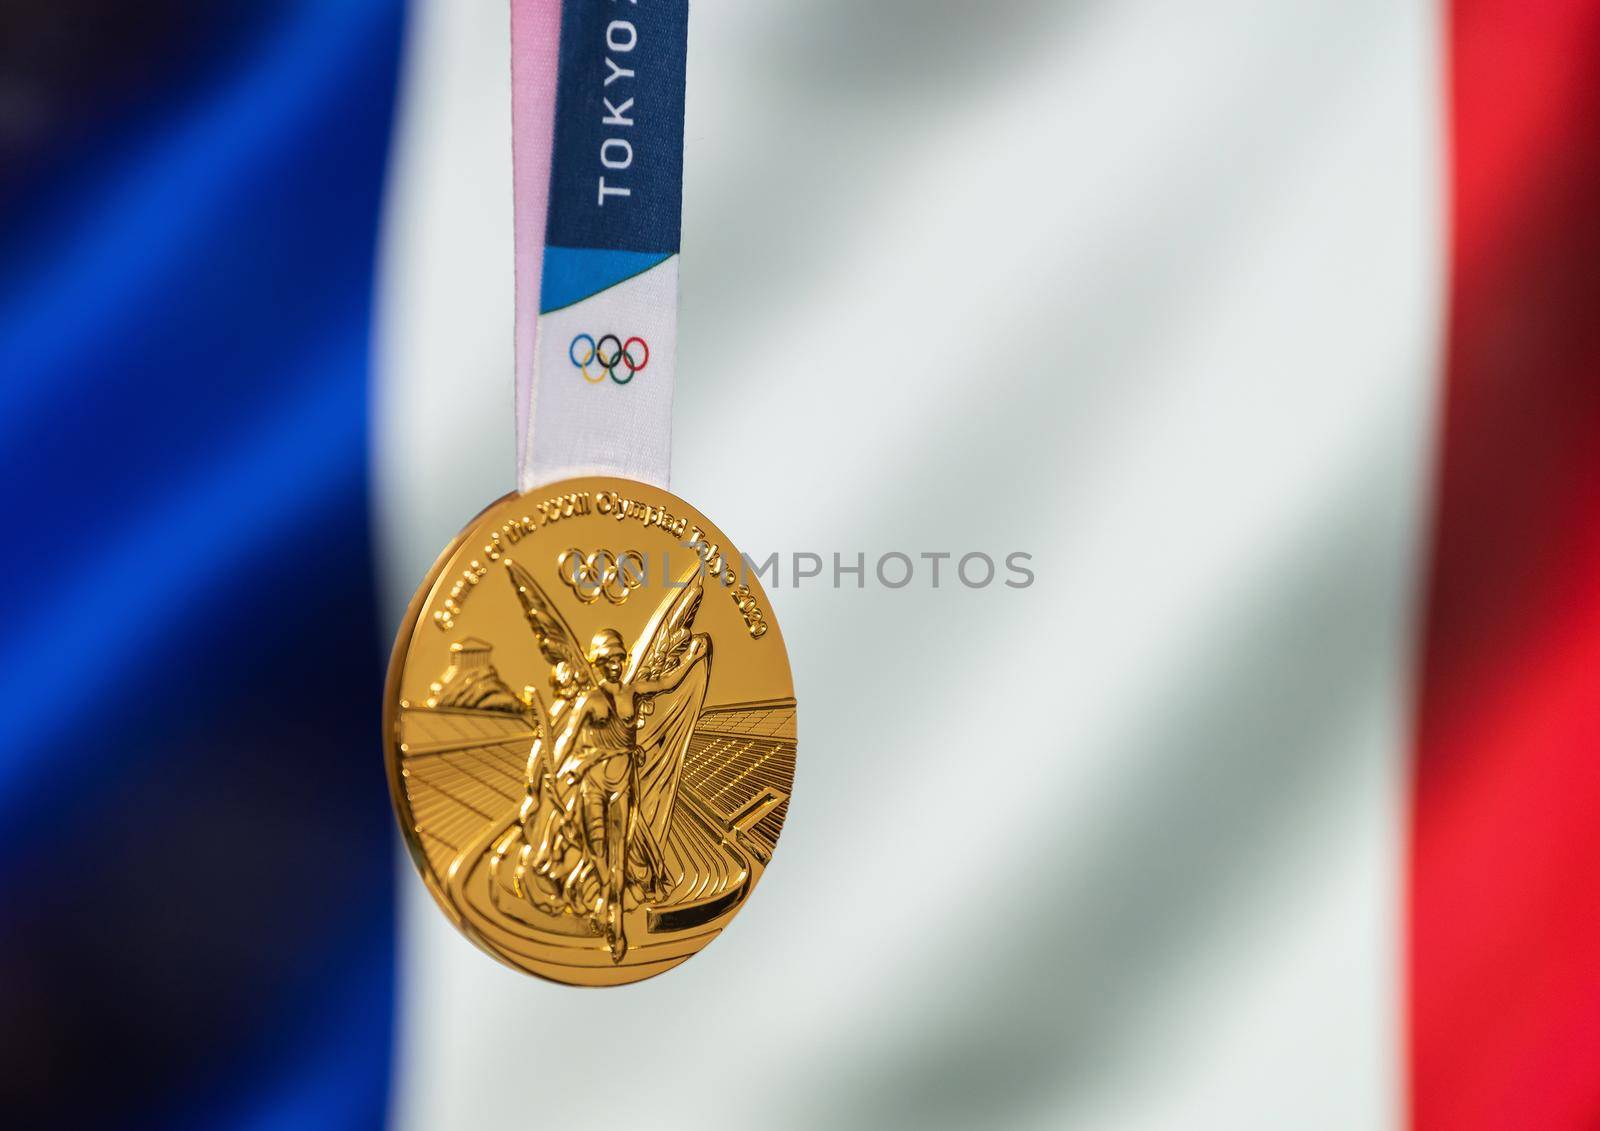 April 25, 2021 Tokyo, Japan. Gold medal of the XXXII Summer Olympic Games 2020 in Tokyo on the background of the flag of France.